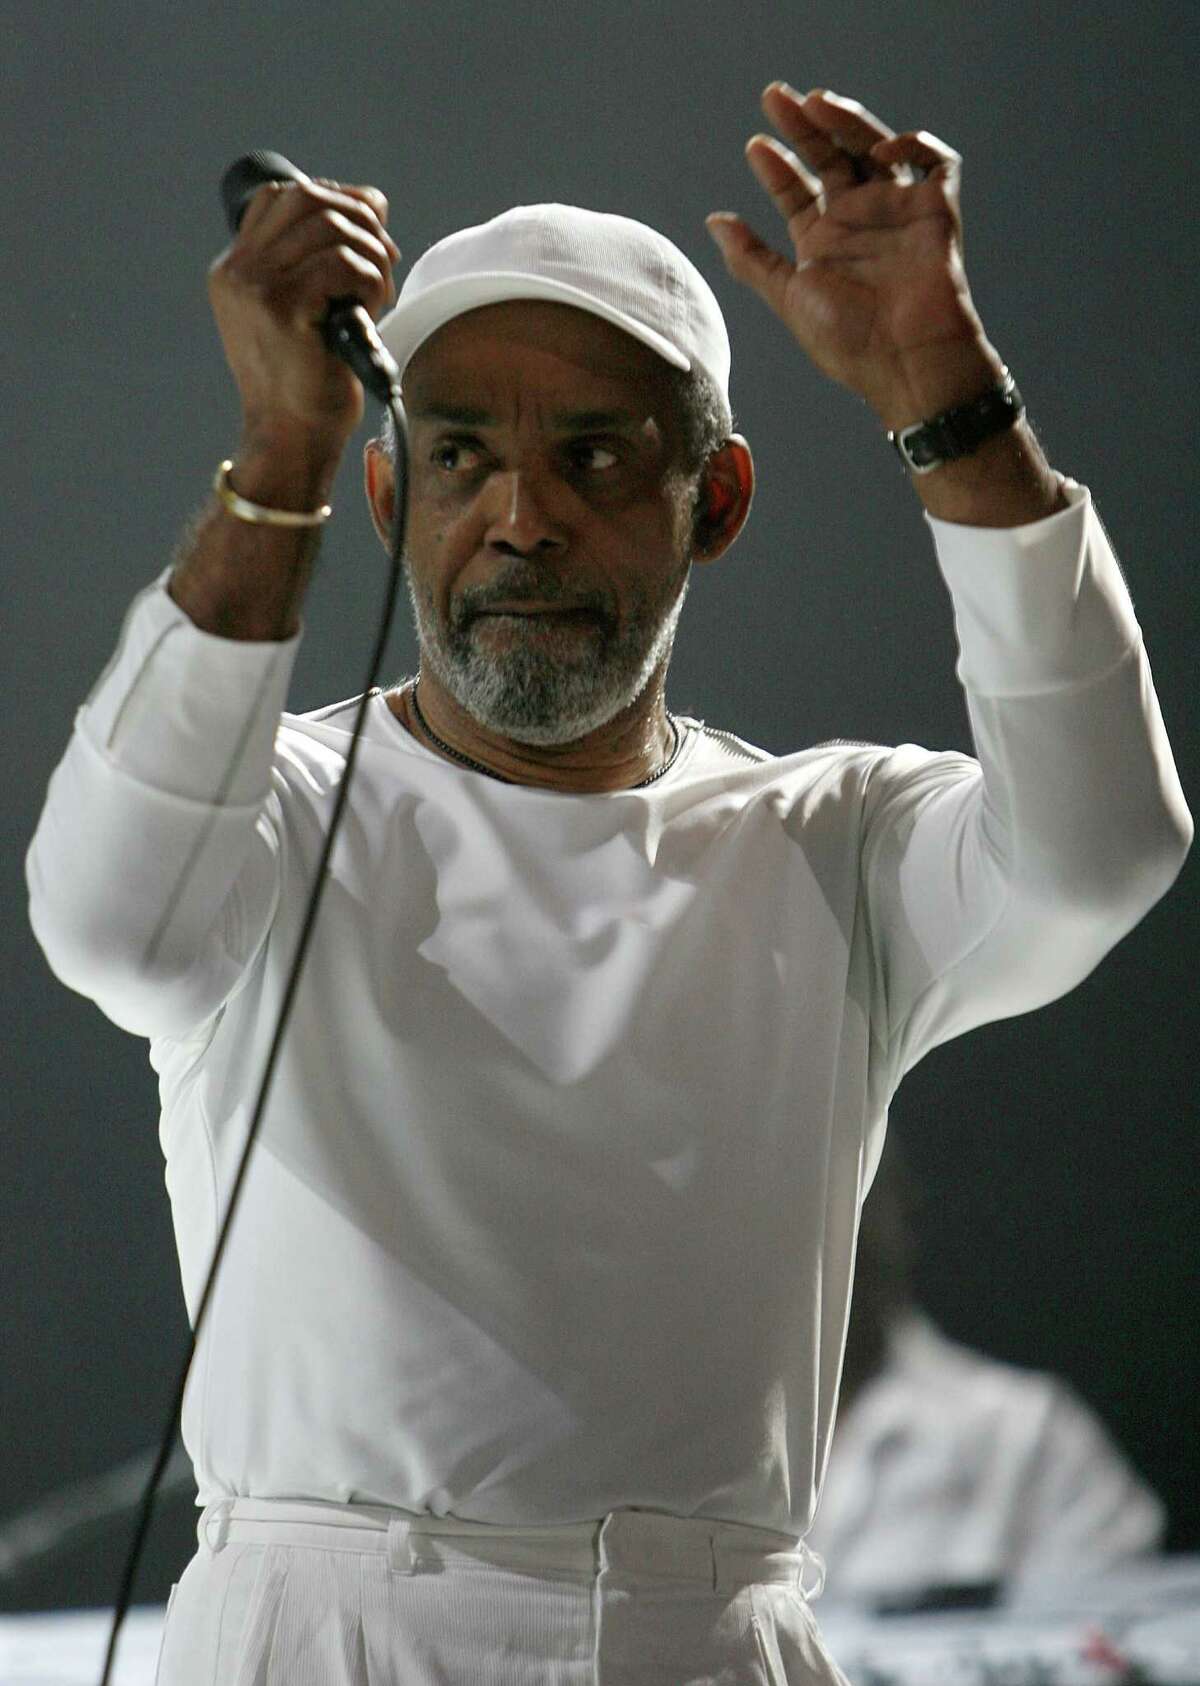 NEW ORLEANS - JULY 06: Maze featuring Frankie Beverly performs at the Louisiana Superdome during the 2008 Essence Music Festival on July 6, 2008 in New Orleans, Louisiana. (Photo by Sean Gardner/Getty Images)